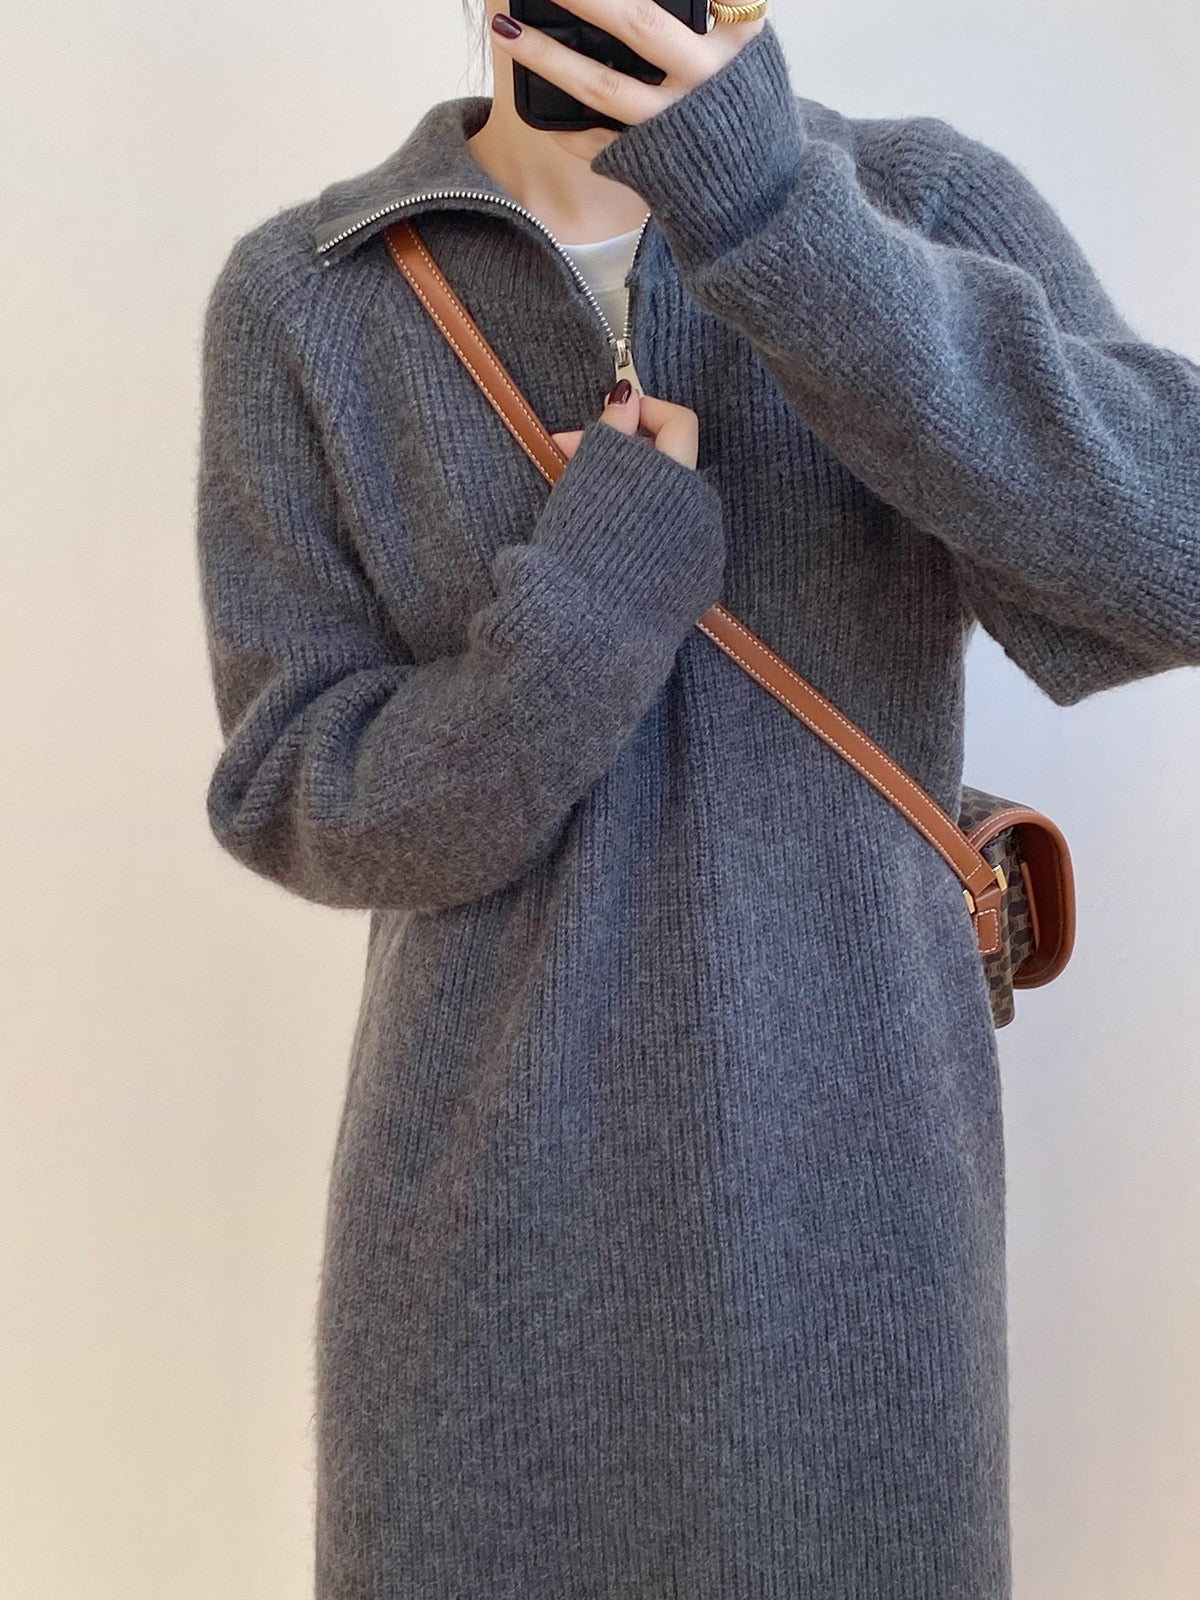 [Korean Style] 4 Color Zipper Collared Sweater Long Knit Dress